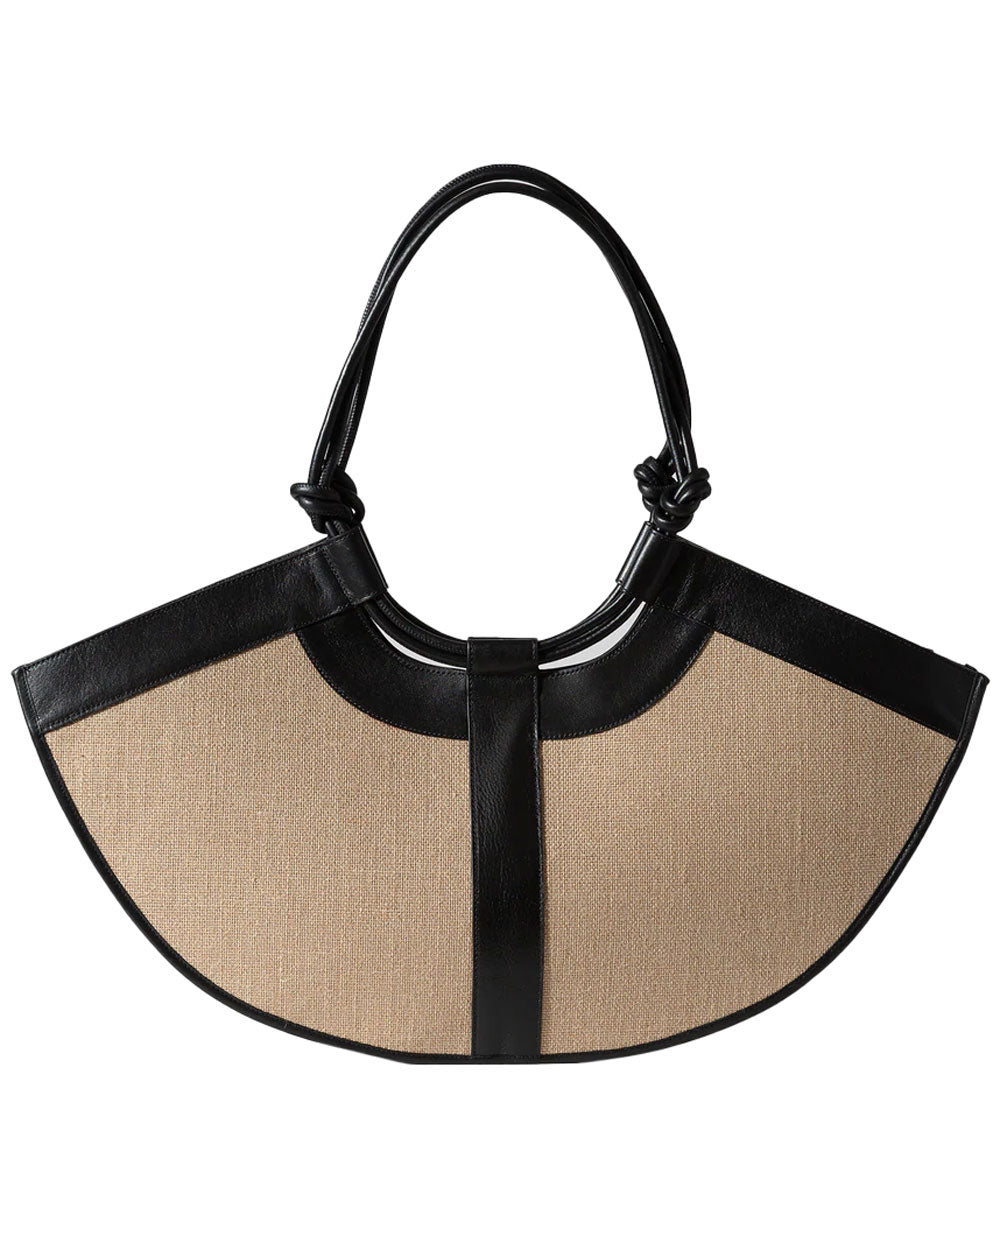 Ventall Tote in Natural and Black